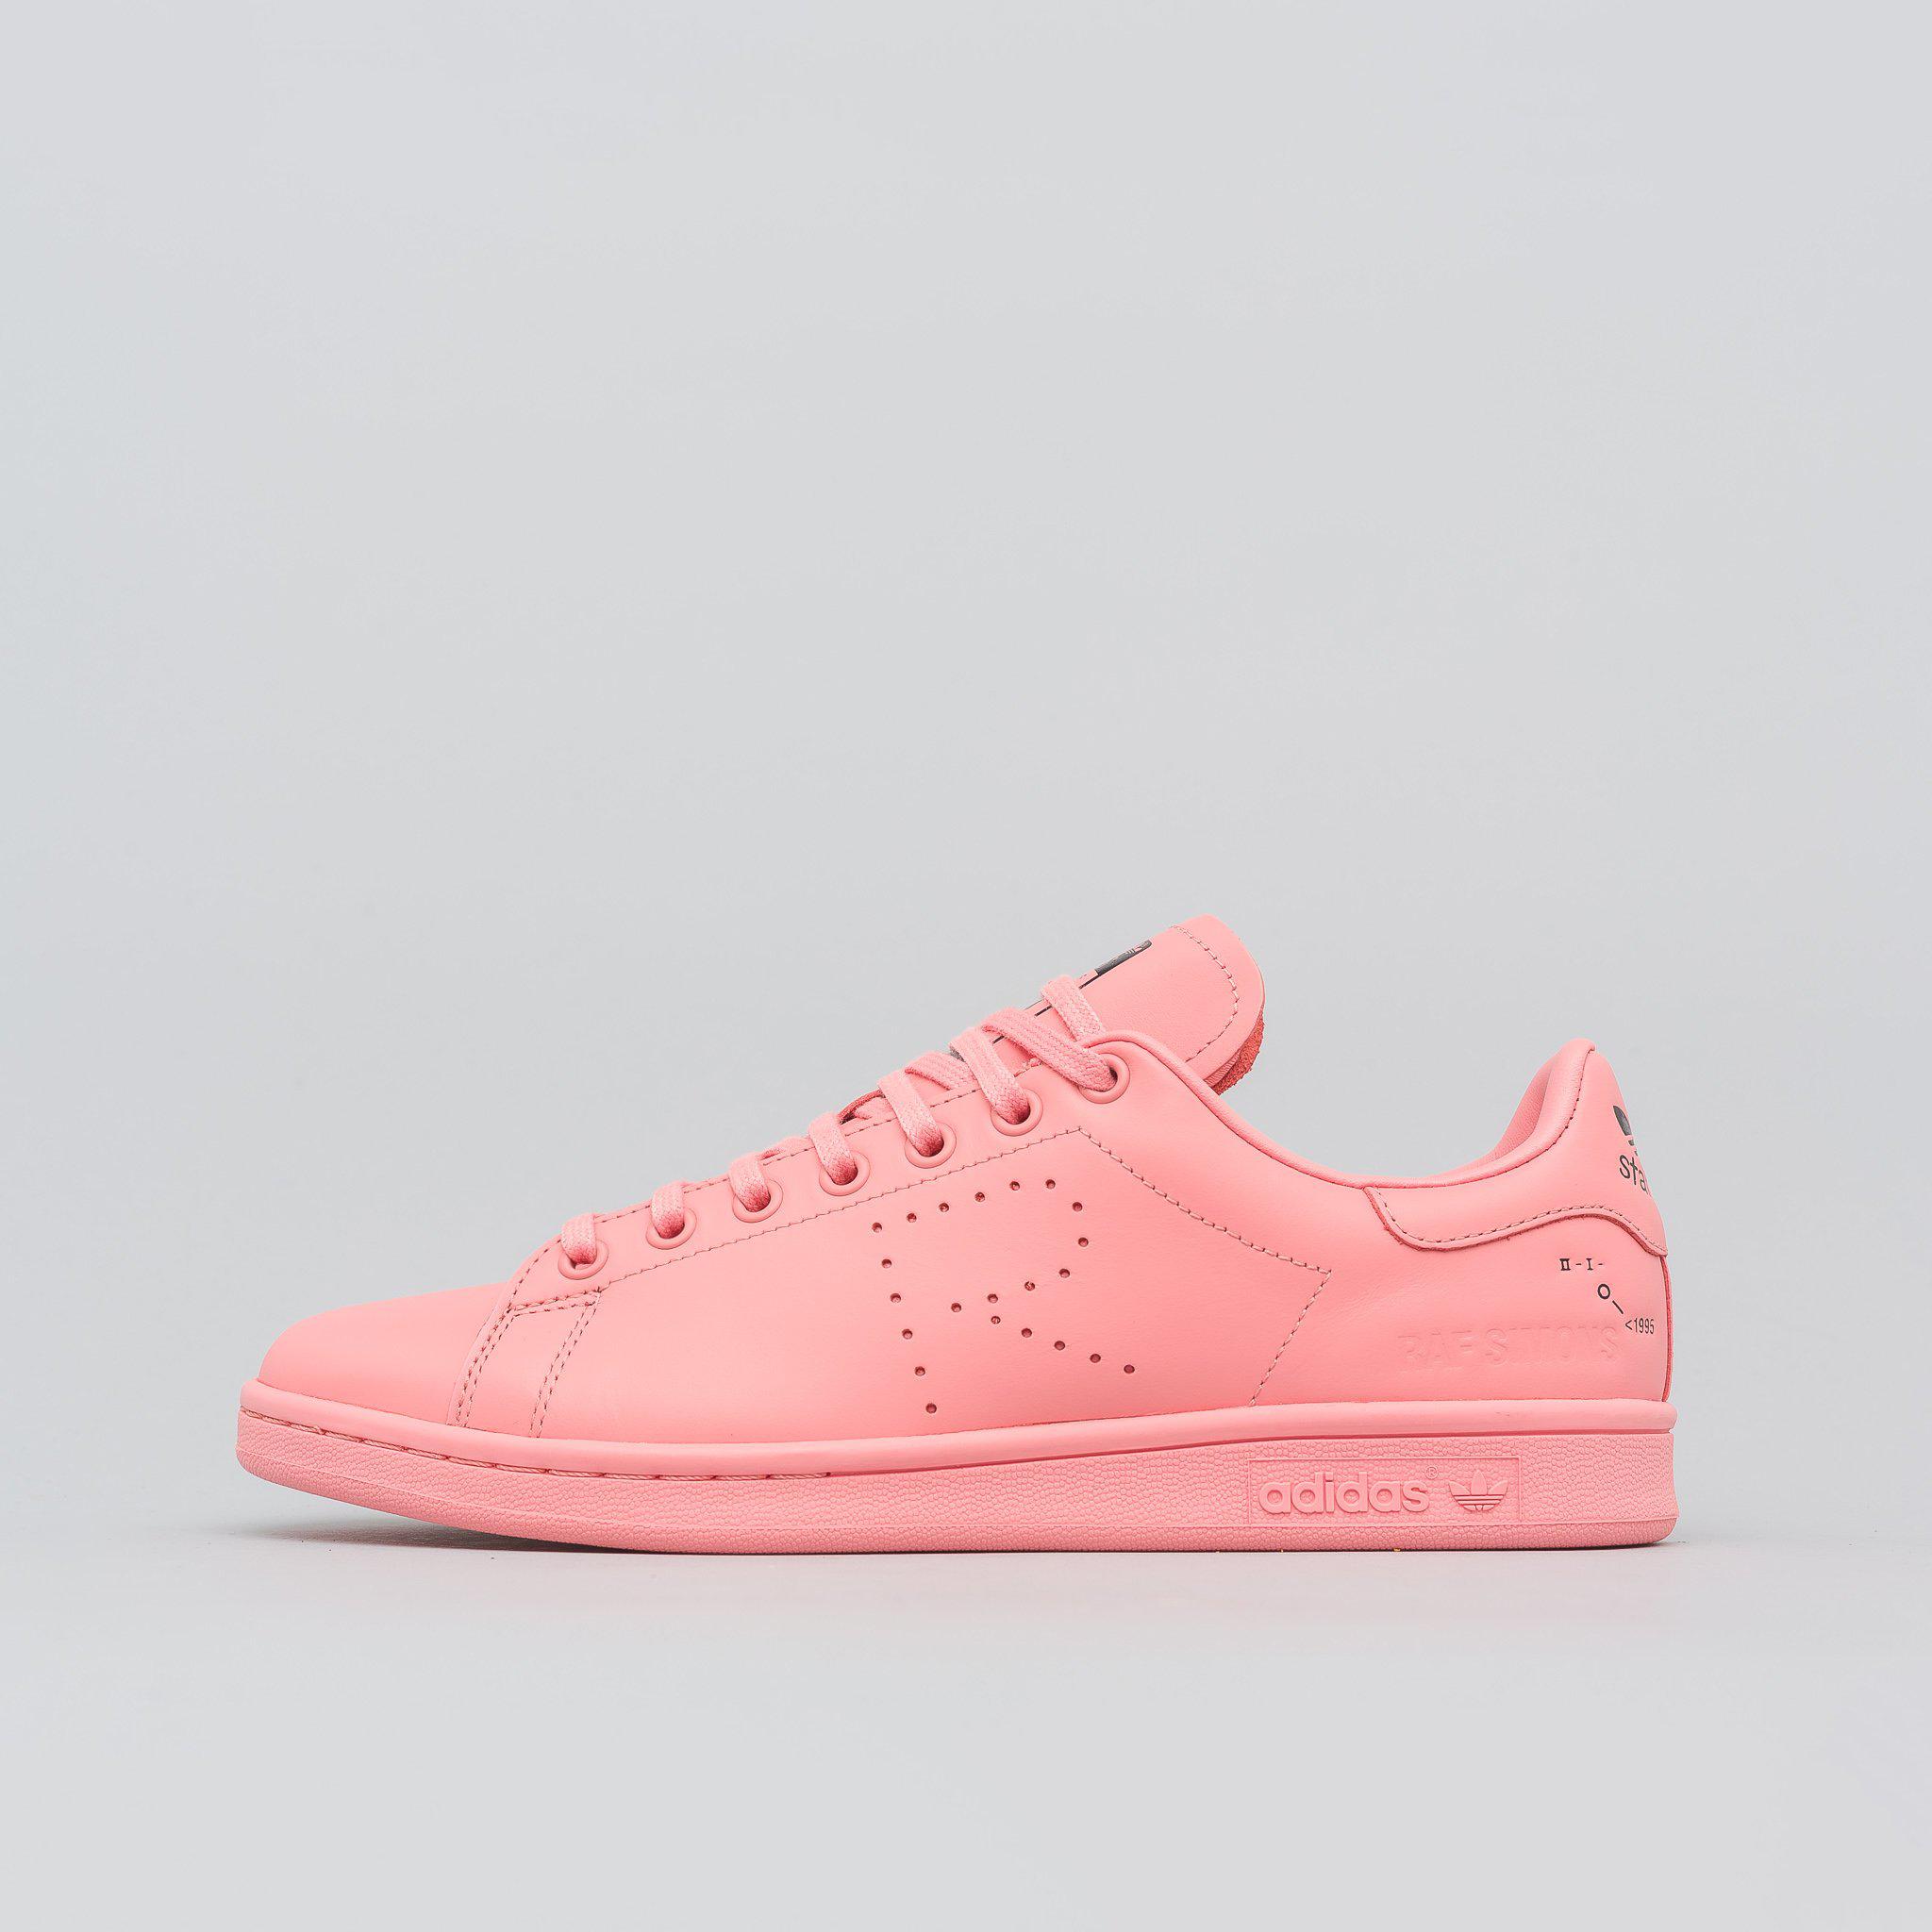 adidas By Raf Simons Leather Rs Stan Smith In Tactile Rose in Pink for Men  - Lyst